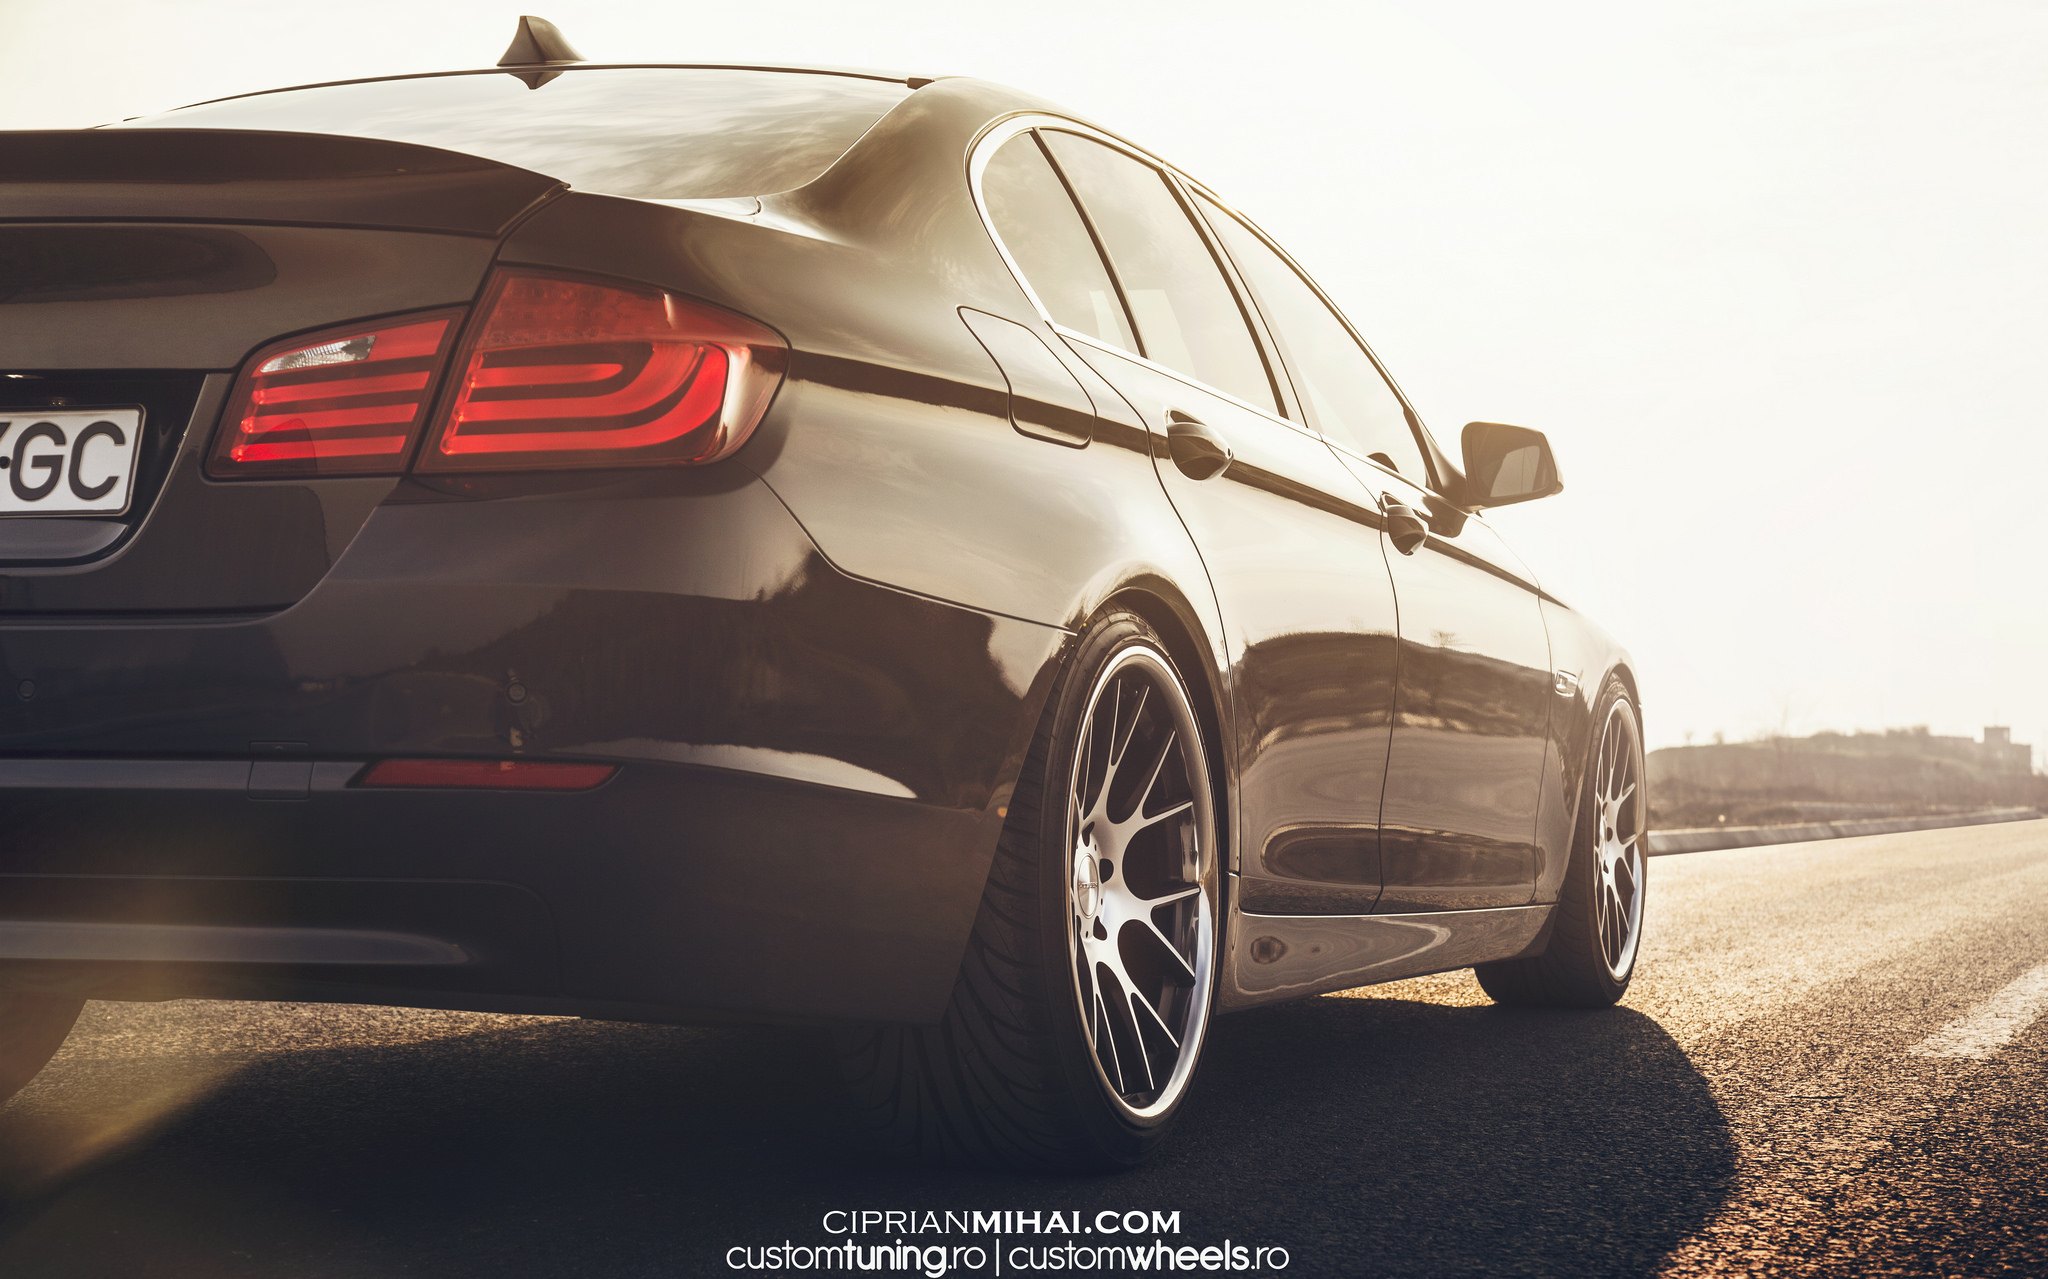 Black BMW 5-Series with Red LED Taillights  - Photo by Ciprian Mihai